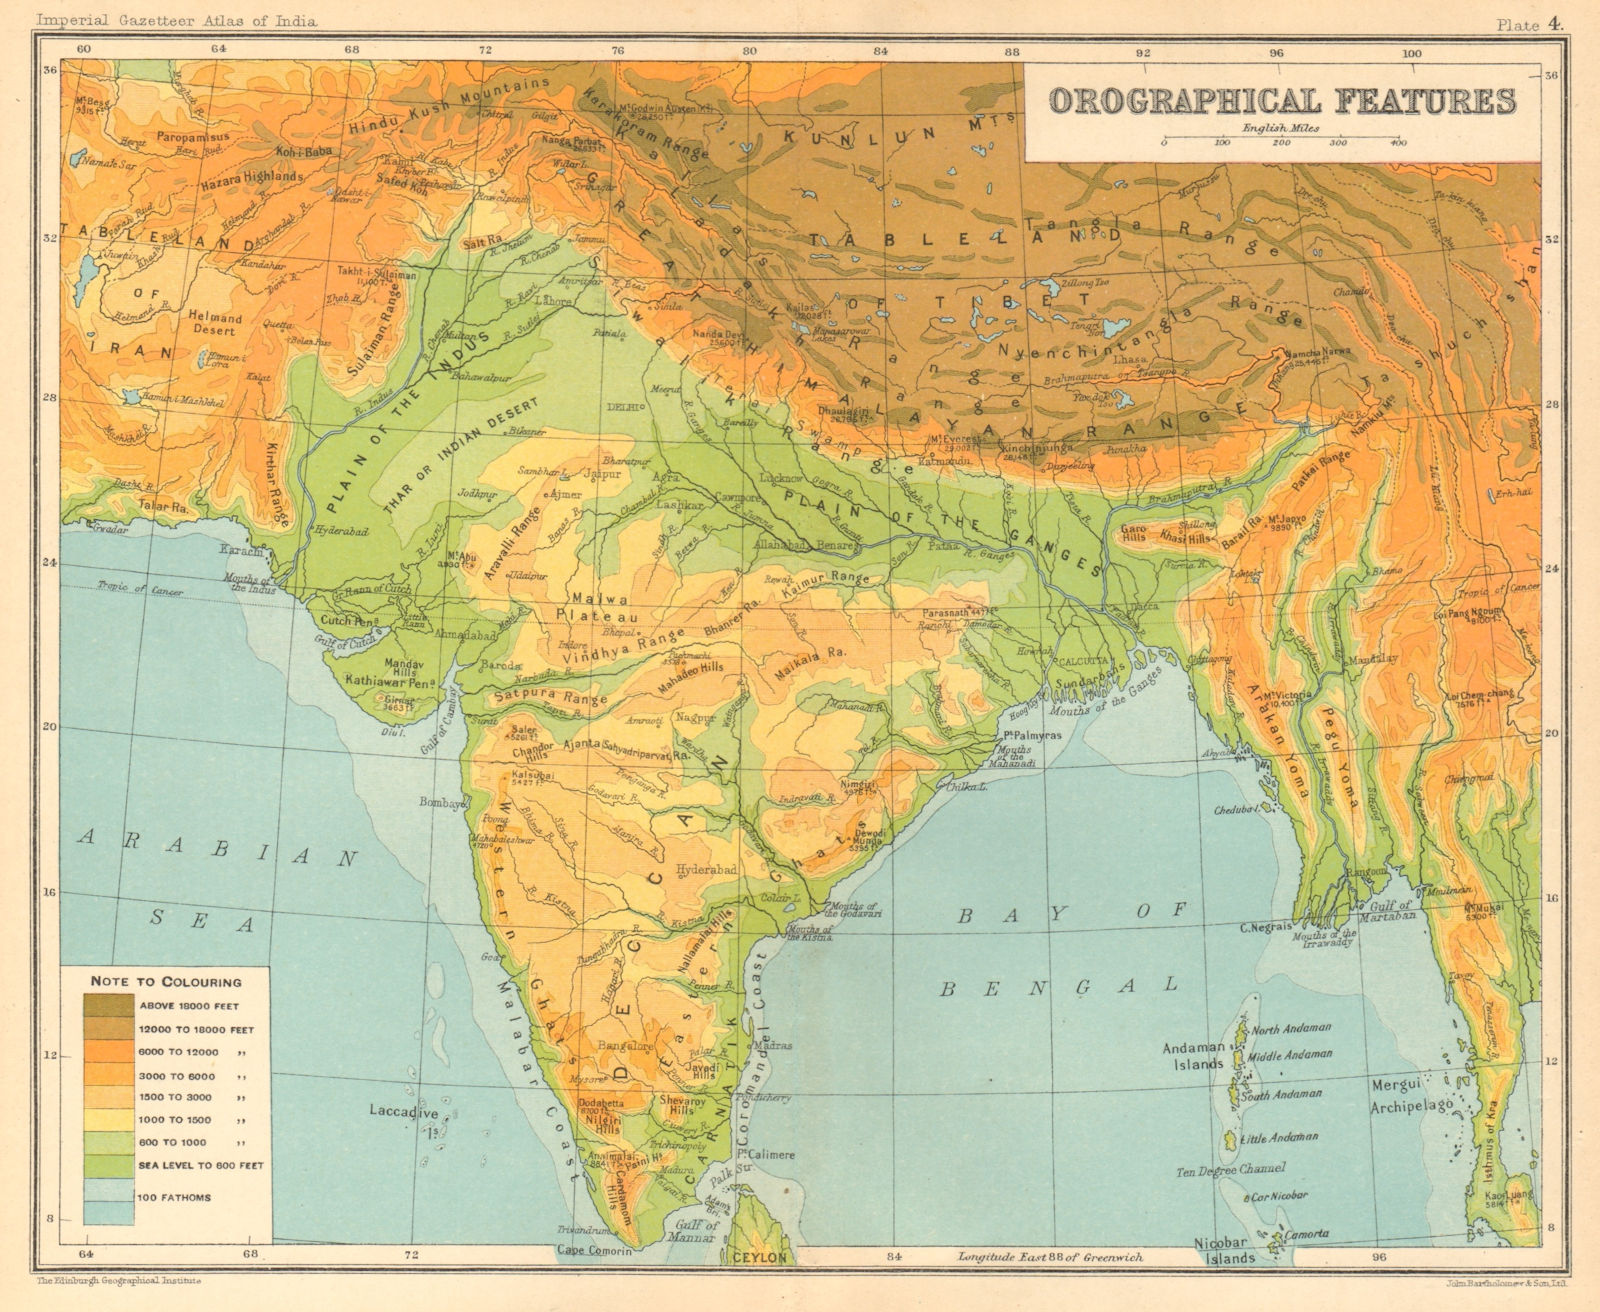 SOUTH ASIA RELIEF. India Burma Pakistan Orographical Features 1931 old map